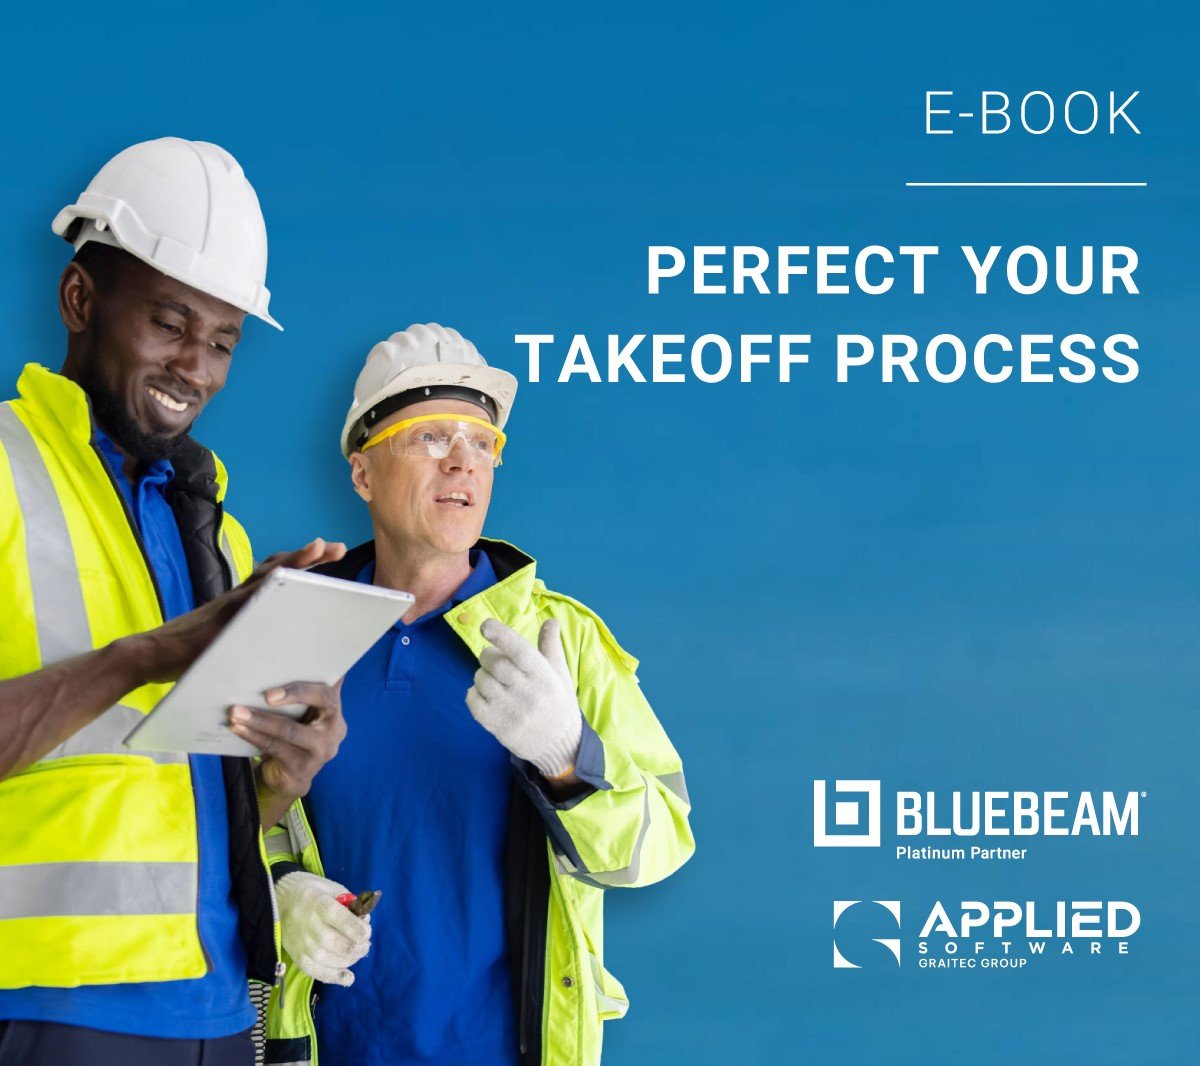 LinkedIn-POST_Bluebeam-e-book-Perfect-Your-Takeoff-Process-v2